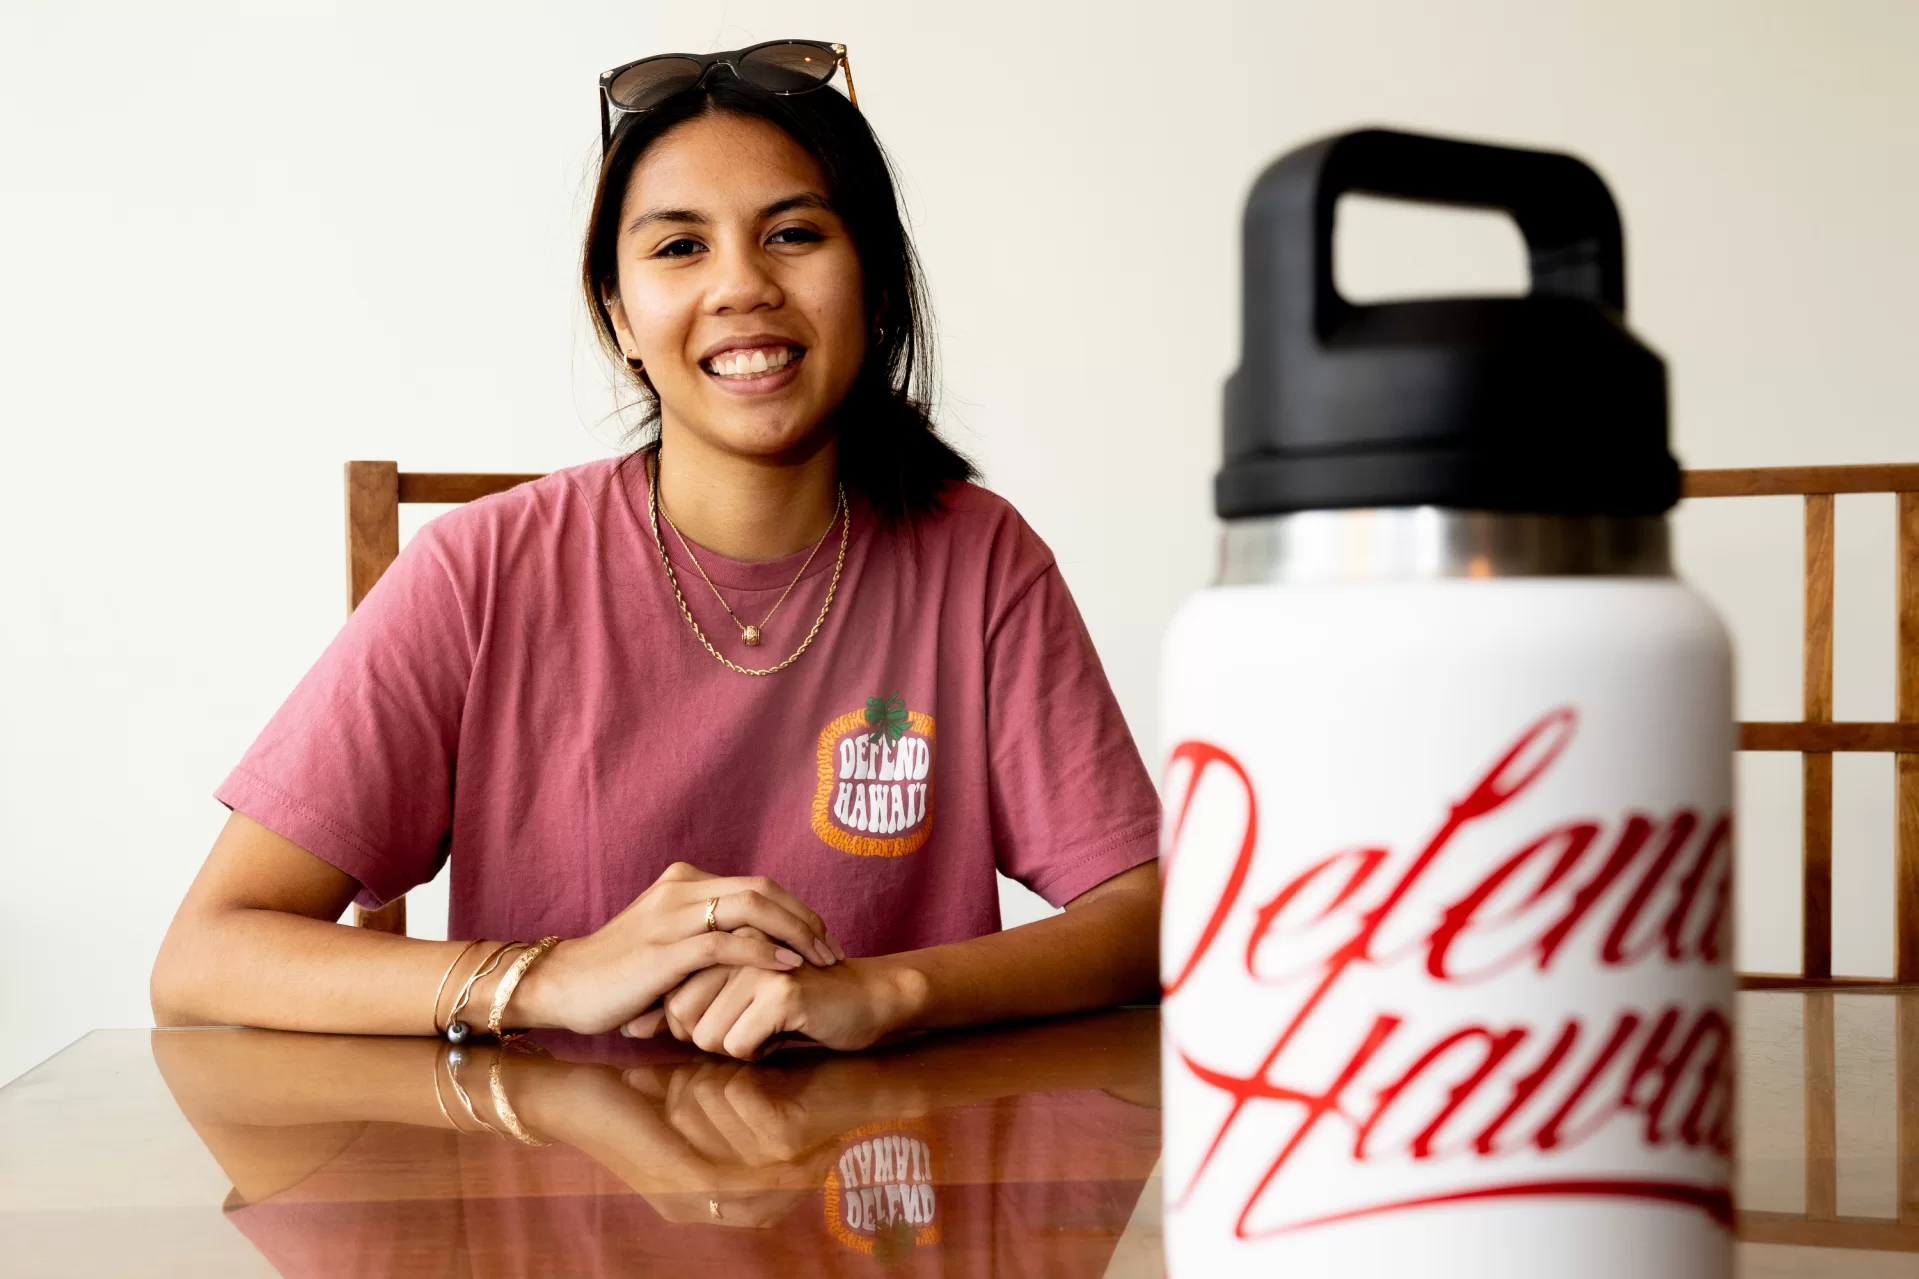 Kaneohe, Hawaii, poses with a t-shirt and Water bottle in connection with a fundraiser that her Bates volleyball team running to support Maui residents who lost family members and property  in the Lahaina wildfires.